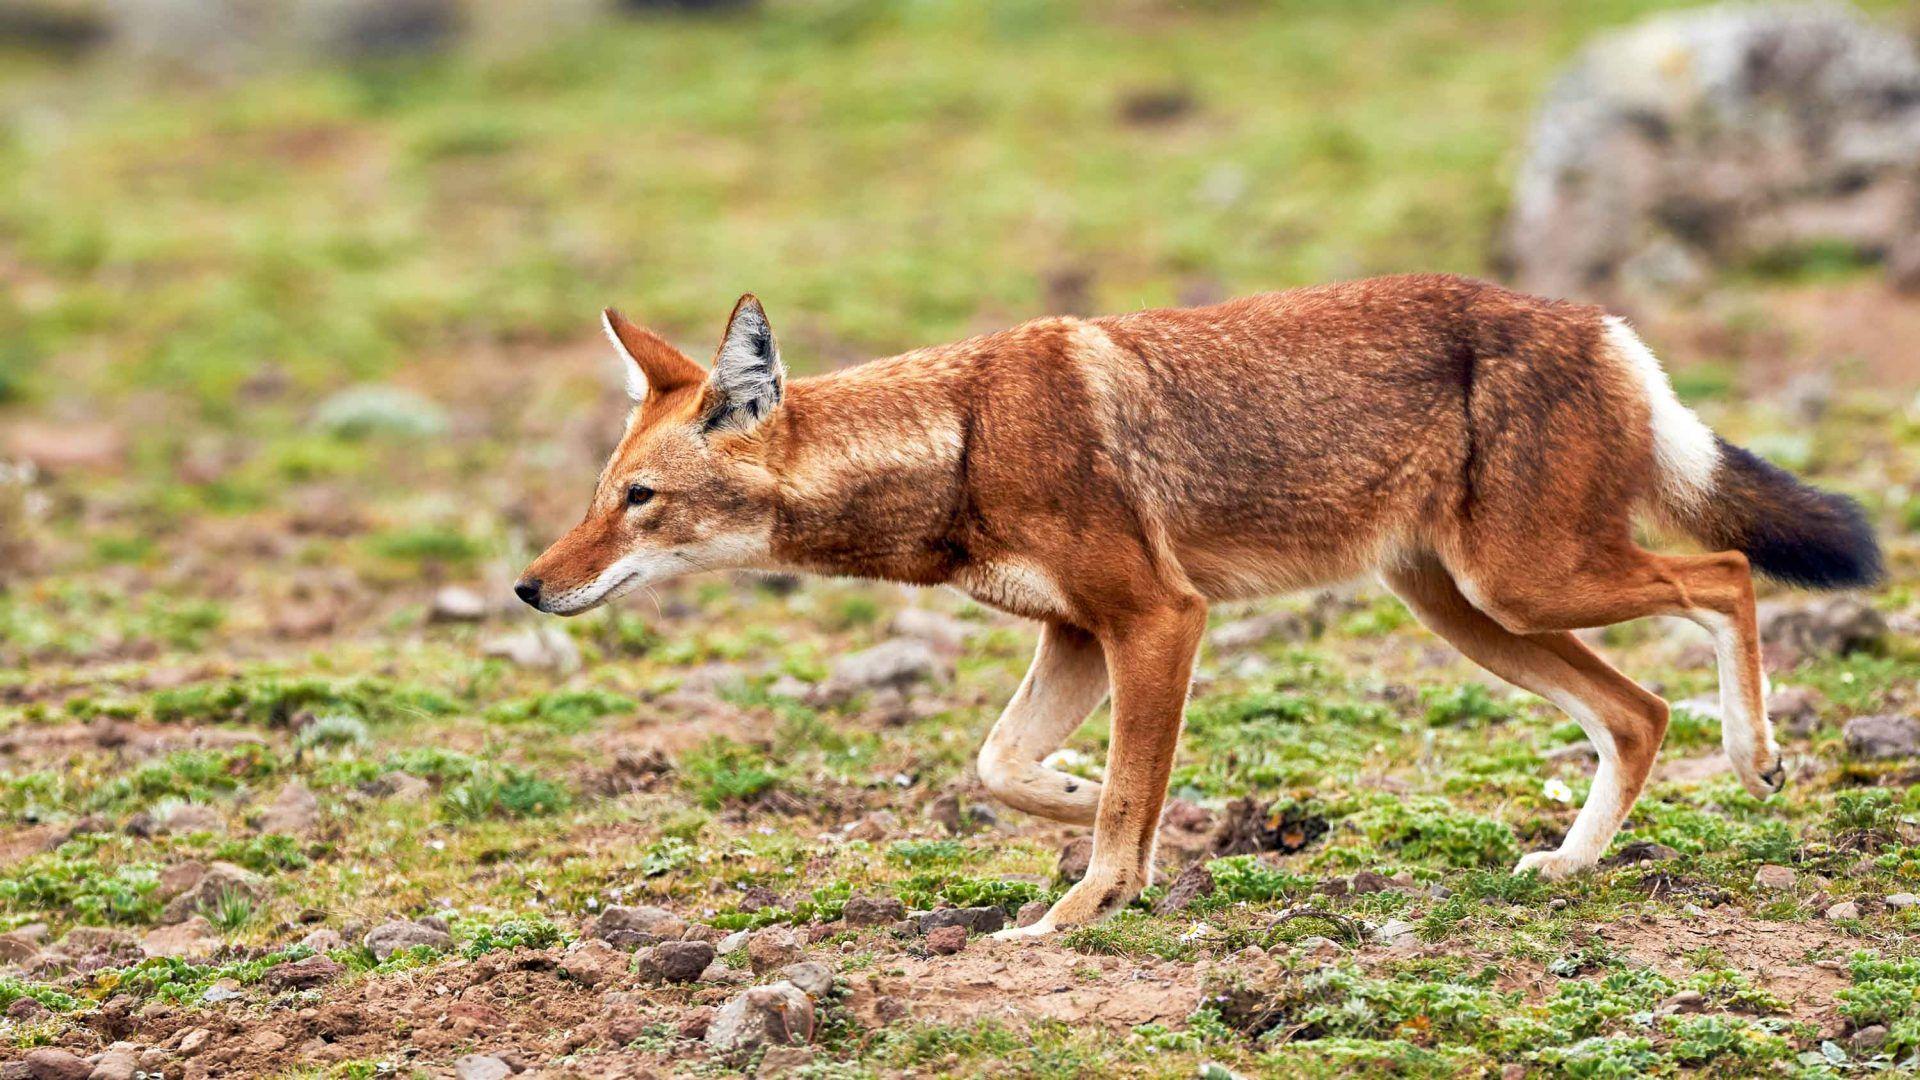 Yellow and Red Wolf Logo - In search of the rare Ethiopian wolf | Adventure.com